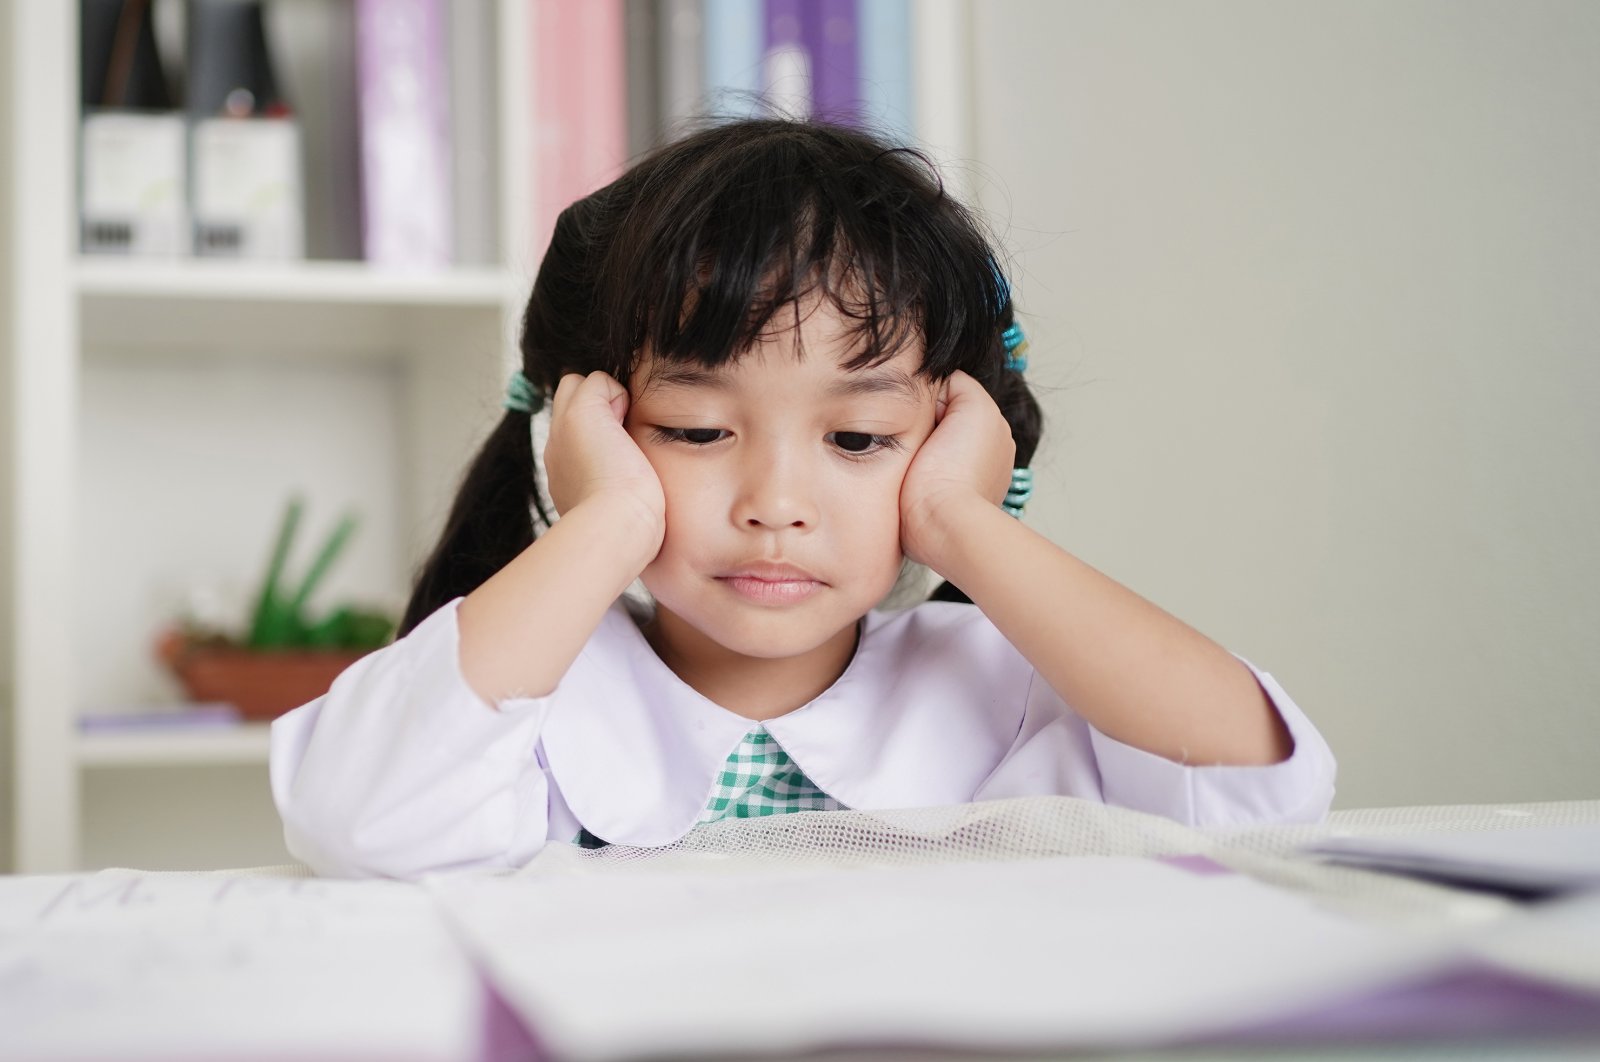 If you catch your child with a frustrated look on their face while studying, try to get them to move around a bit. (Shutterstock Photo)